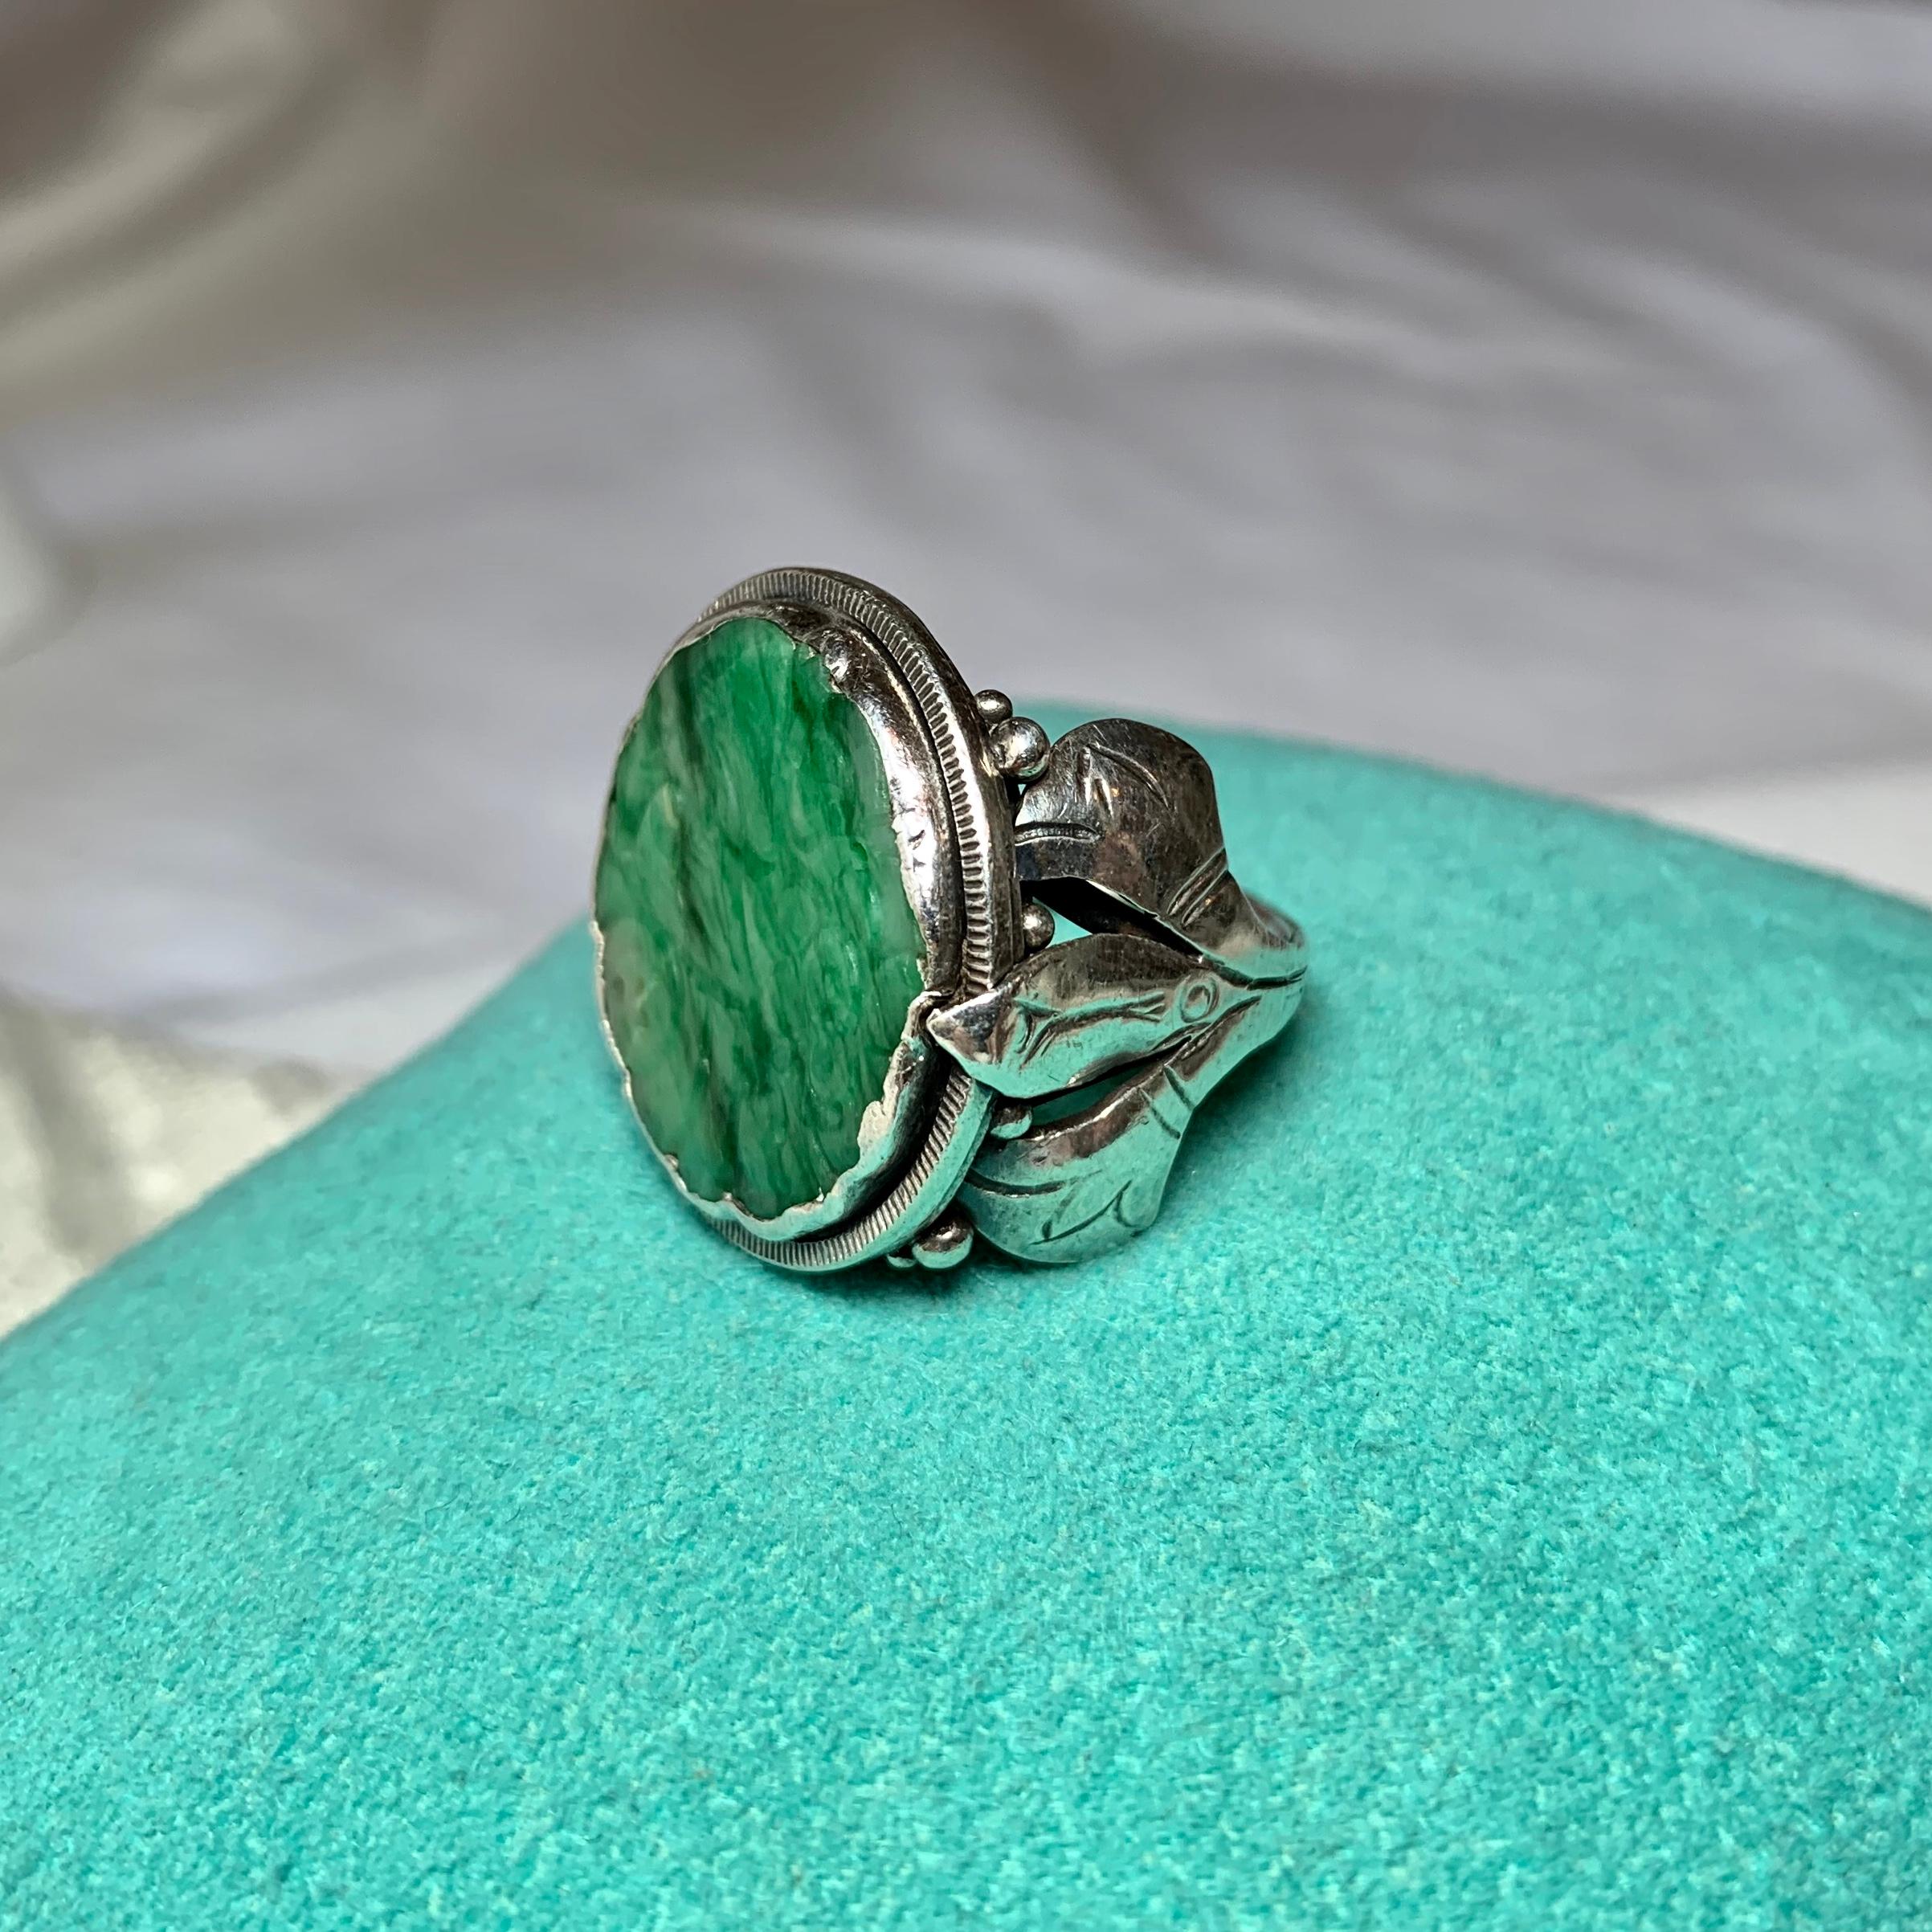 A very rare Museum Quality Arts & Crafts period, Mid-Century Modern carved Jade Ring in Handwrought Sterling Silver.  The jewel is a Mid-Century Modern masterpiece by the acclaimed artist Doris Cliff (1885-1968) of Chicago.   The ring is hand